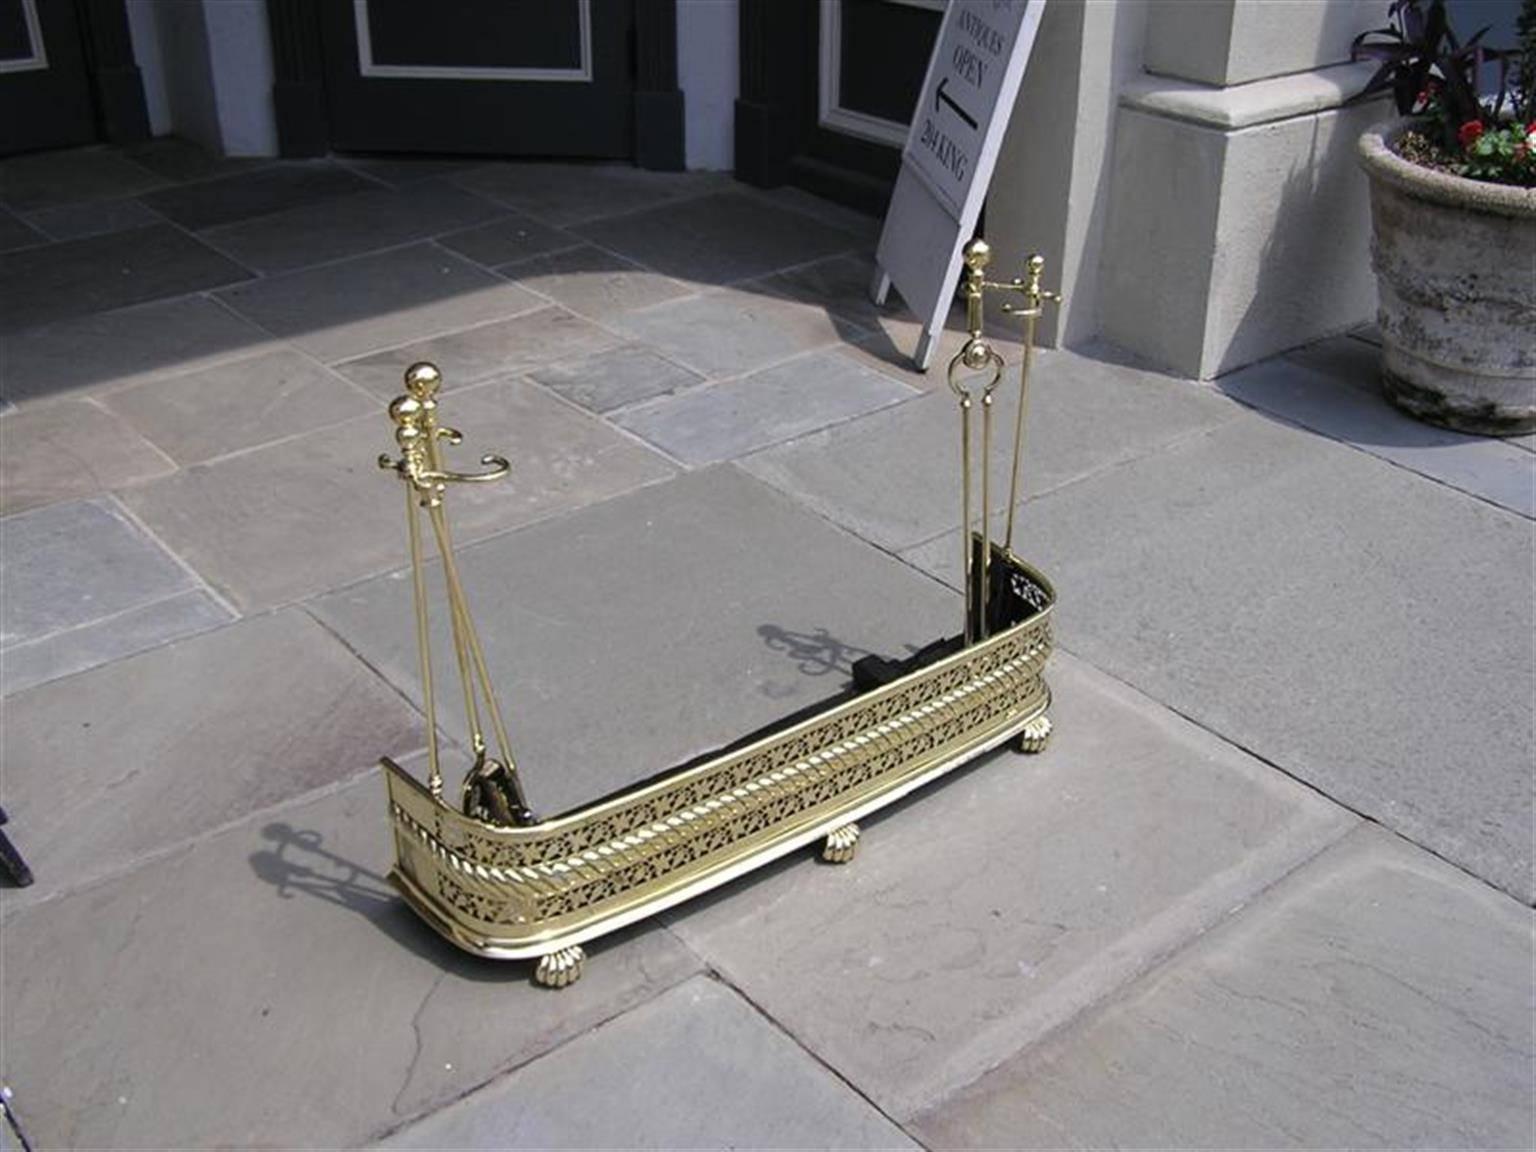 English brass rope and ivy motif fireplace fender with the original three-piece tool set and tool holders. Early 19th Century. Set consist of shovel, tong, and poker.